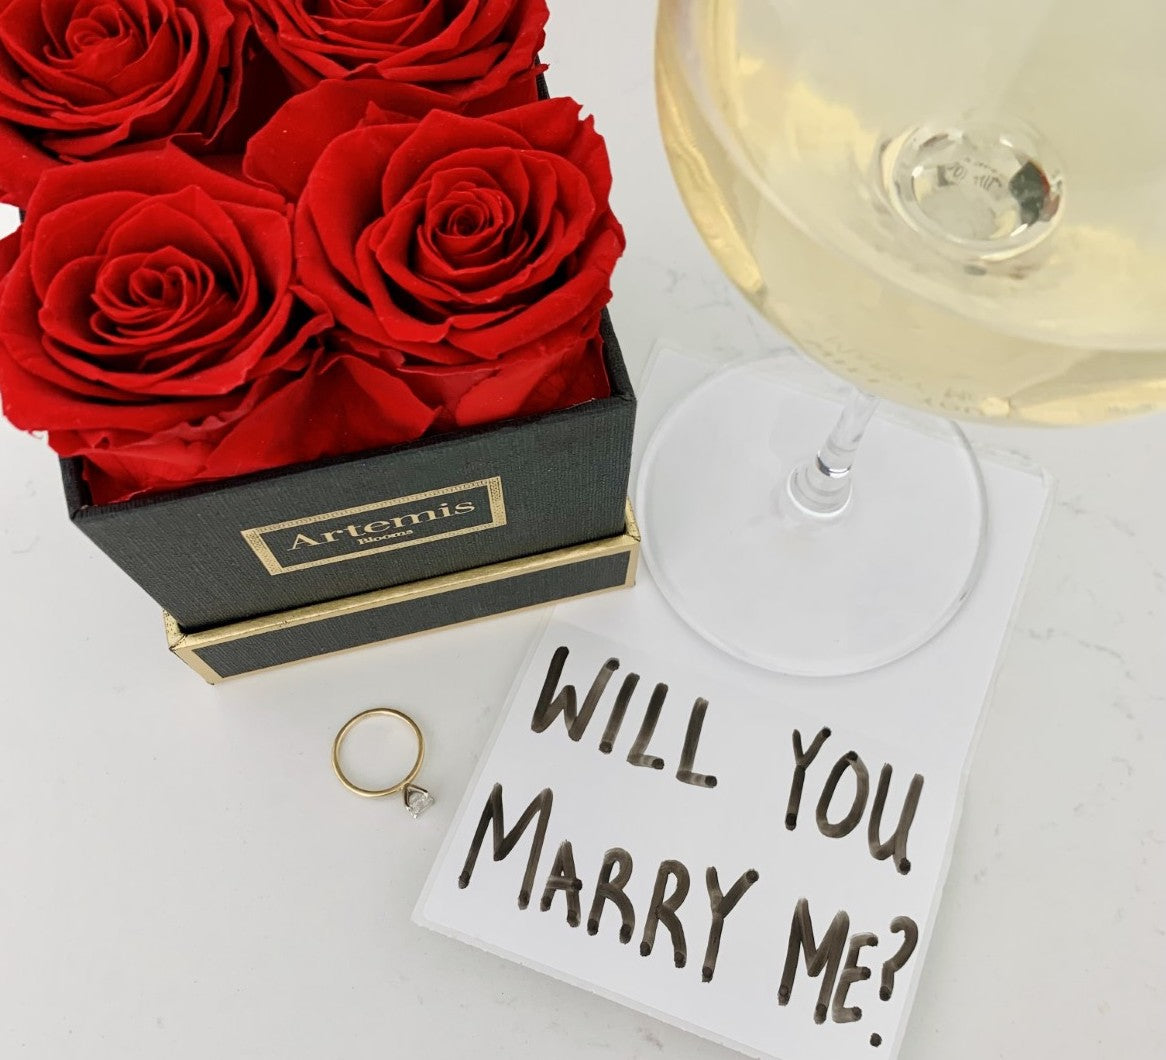 A marriage proposal with red roses in a black box with an engagement ring and white wine in a glass